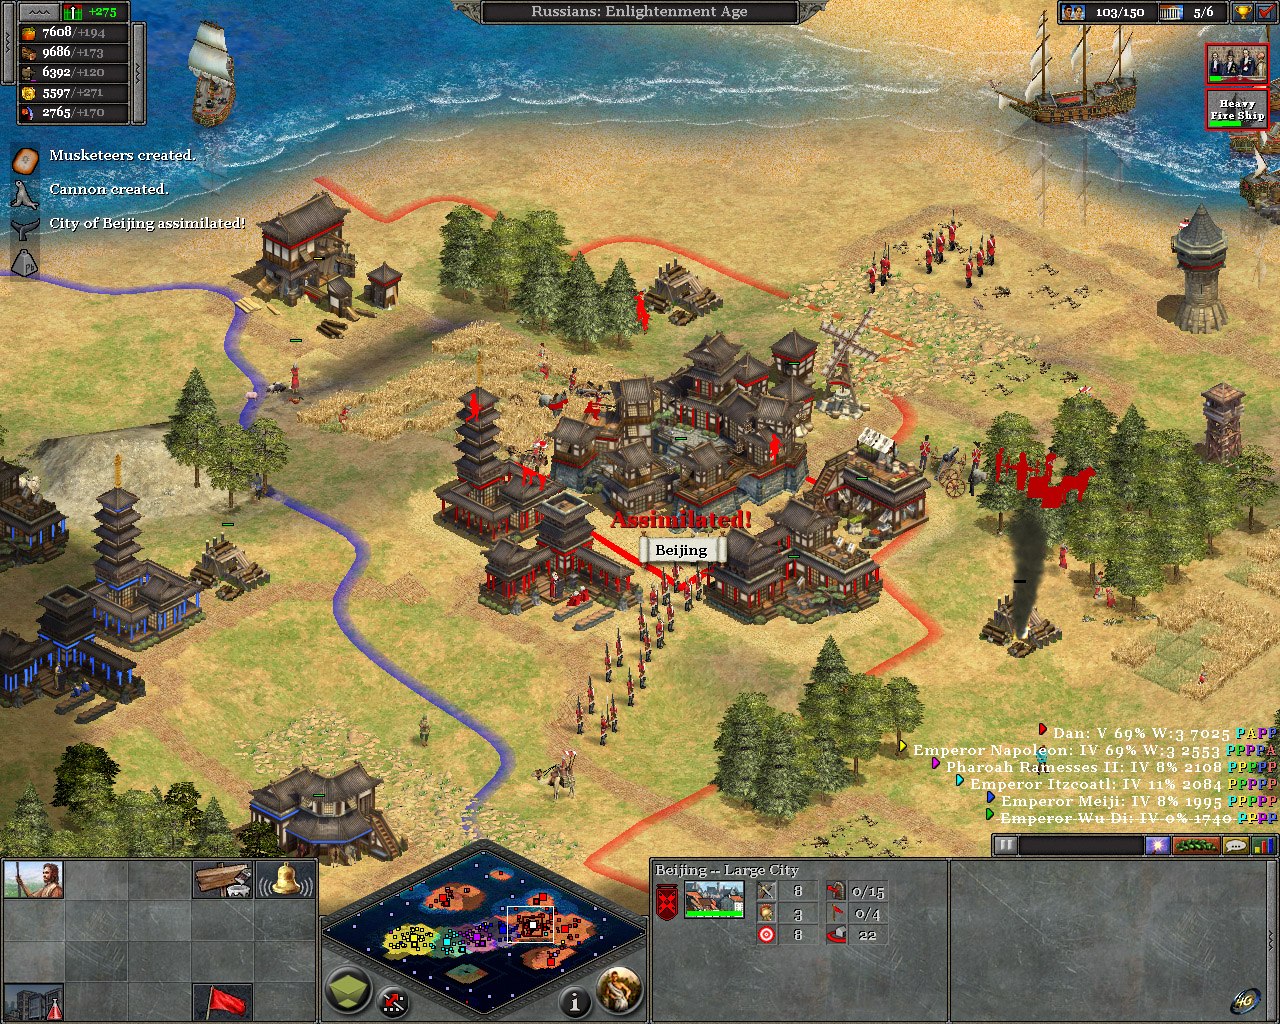 Prerelease:Rise of Nations - The Cutting Room Floor